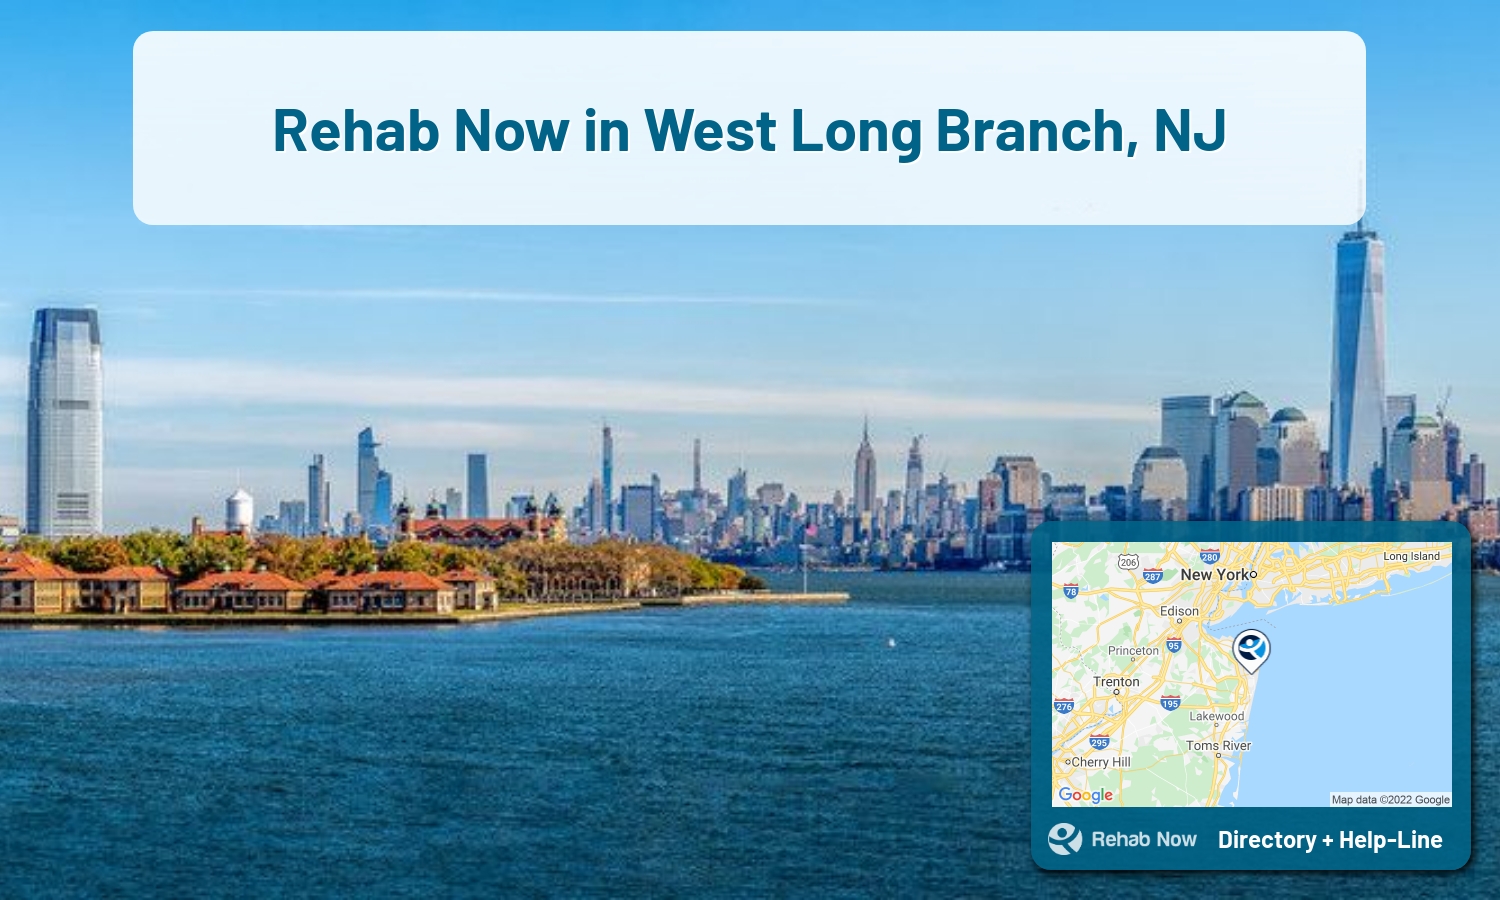 West Long Branch, NJ Treatment Centers. Find drug rehab in West Long Branch, New Jersey, or detox and treatment programs. Get the right help now!